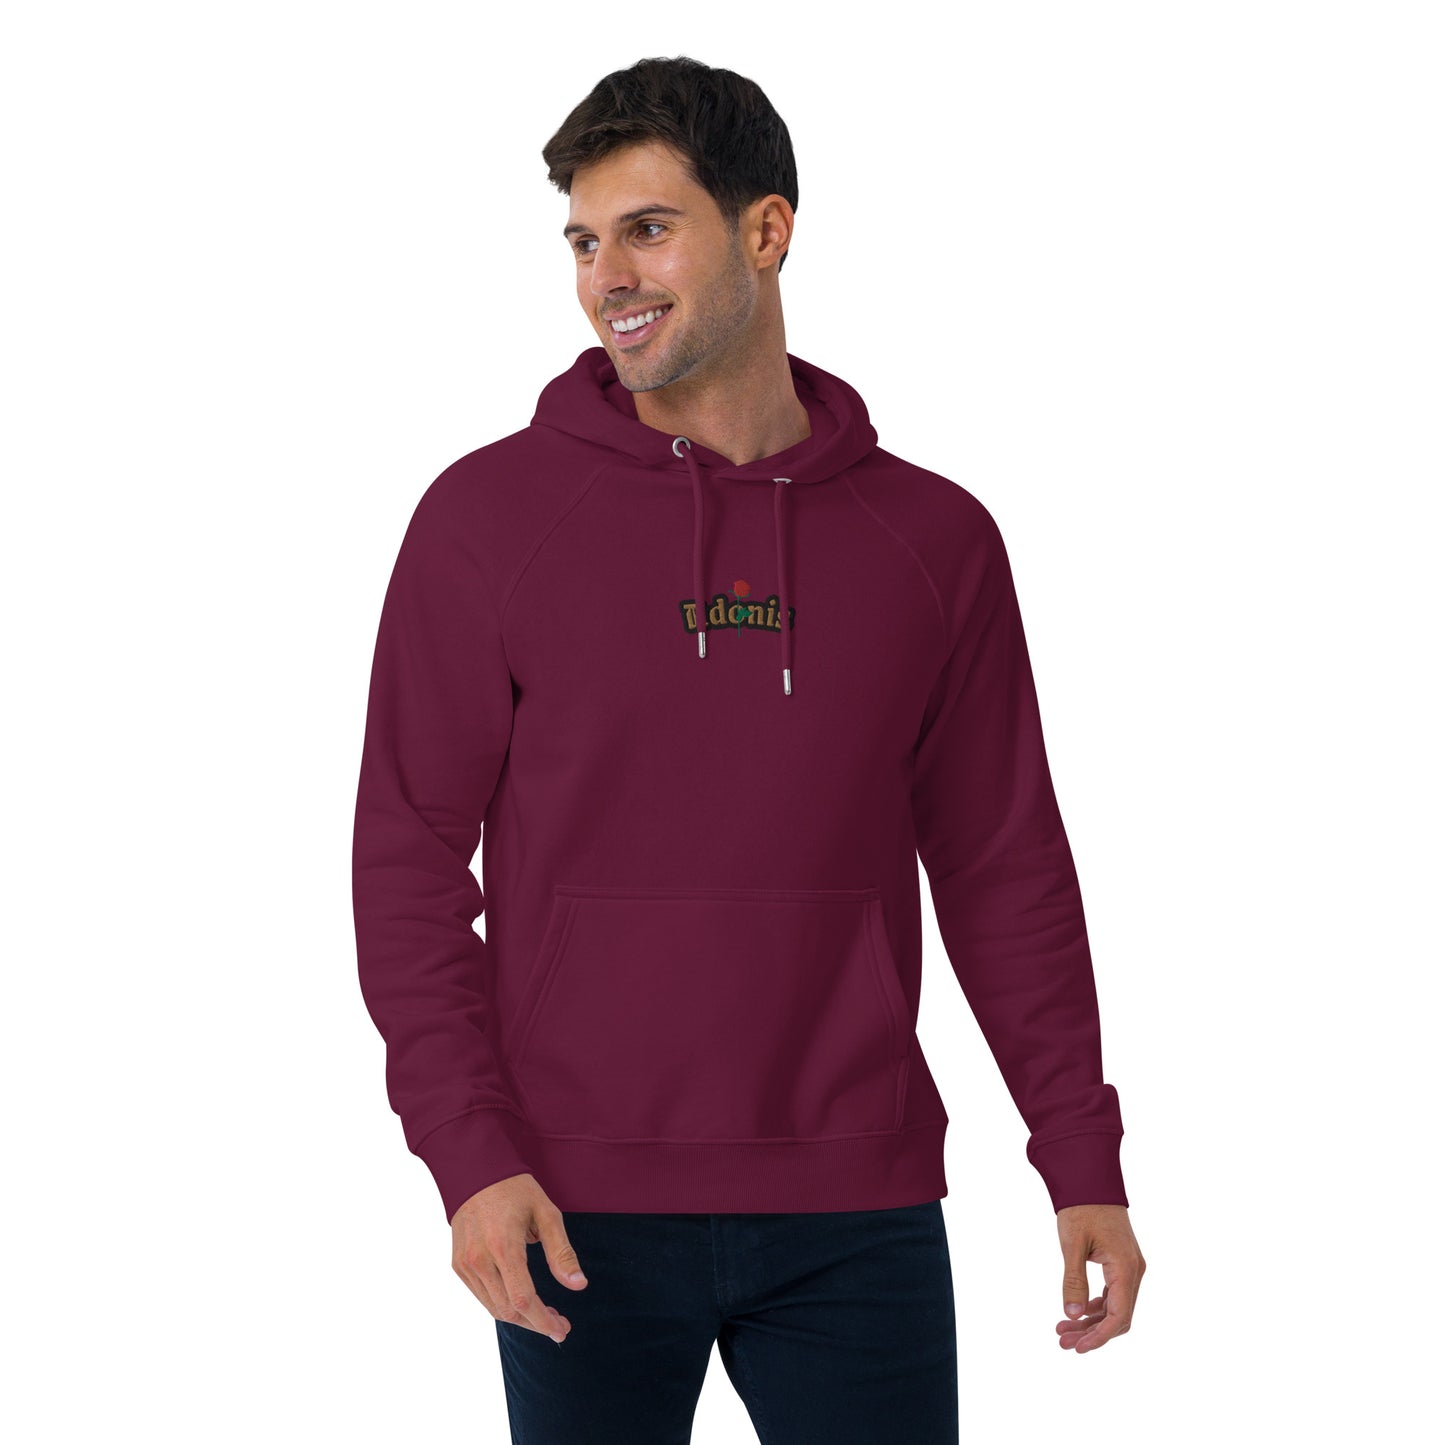 Adonis-Creations - Men's Cotton Jersey-lined hoodie